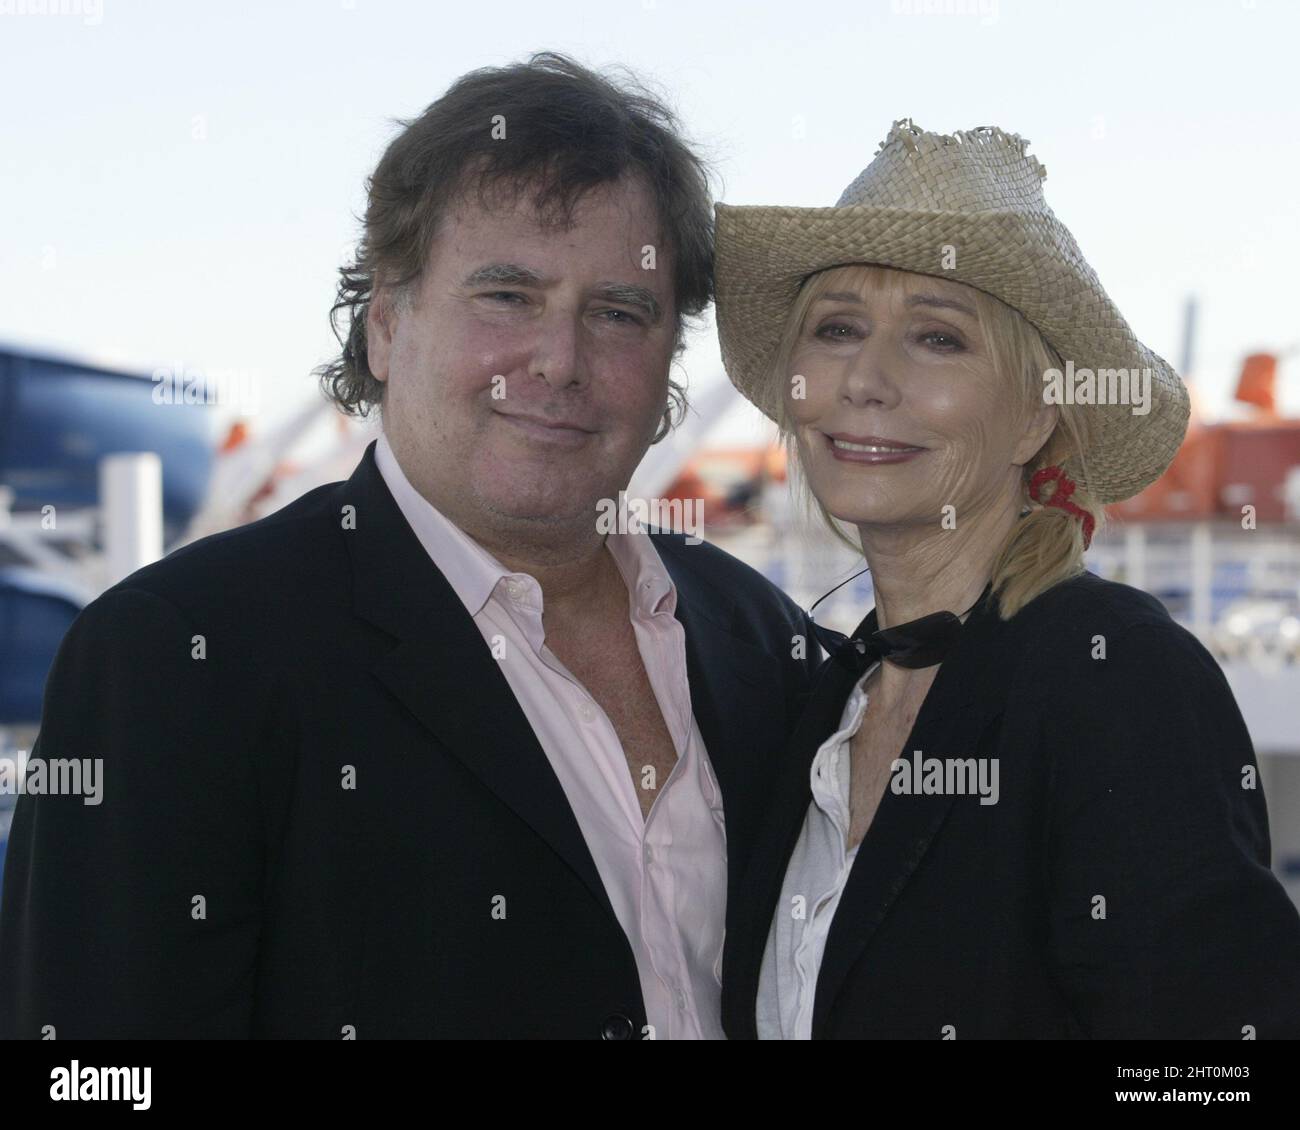 MIAMI, FLORIDA - DECEMBER 29: Actress Sally Kellerman and husband, producer Jonathan Krane attend a pre-production party for the soon to be filming movie 'Dancin' on the Edge' on the Carnival Cruise lines ship Imagination at the port of Miami on December 29, 2005 in Miami Florida People; Sally Kellerman; Jonathan Krane Credit: Storms Media Group/Alamy Live News Stock Photo